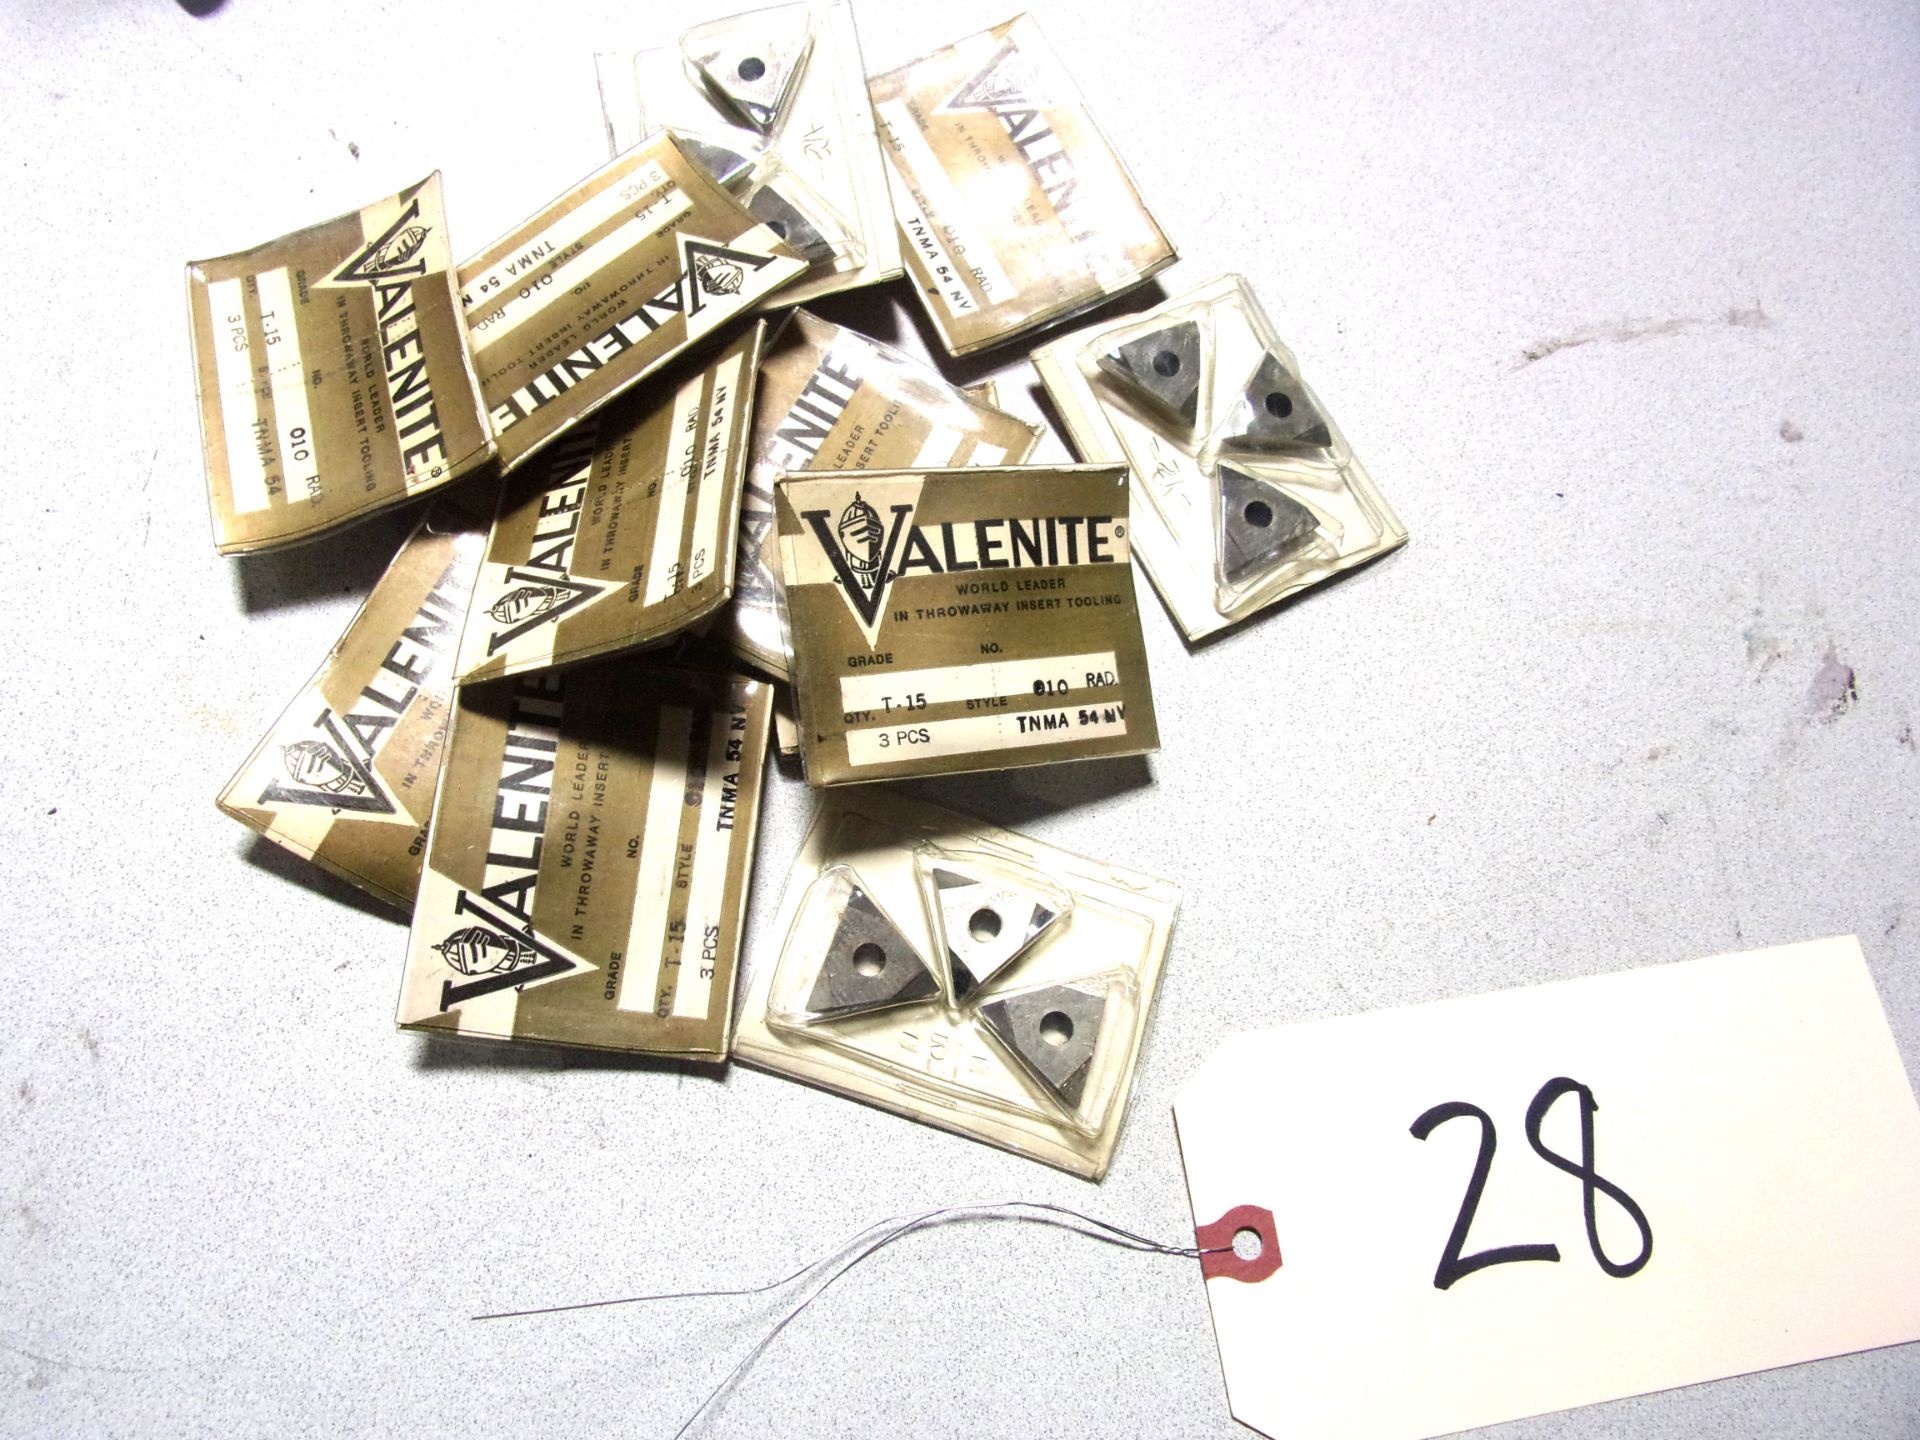 LOT OF (12 PACKS OF 3) VALENITE CARBIDE INSETS, GRADE T-15 WITH 010 RADIUS TNMA54